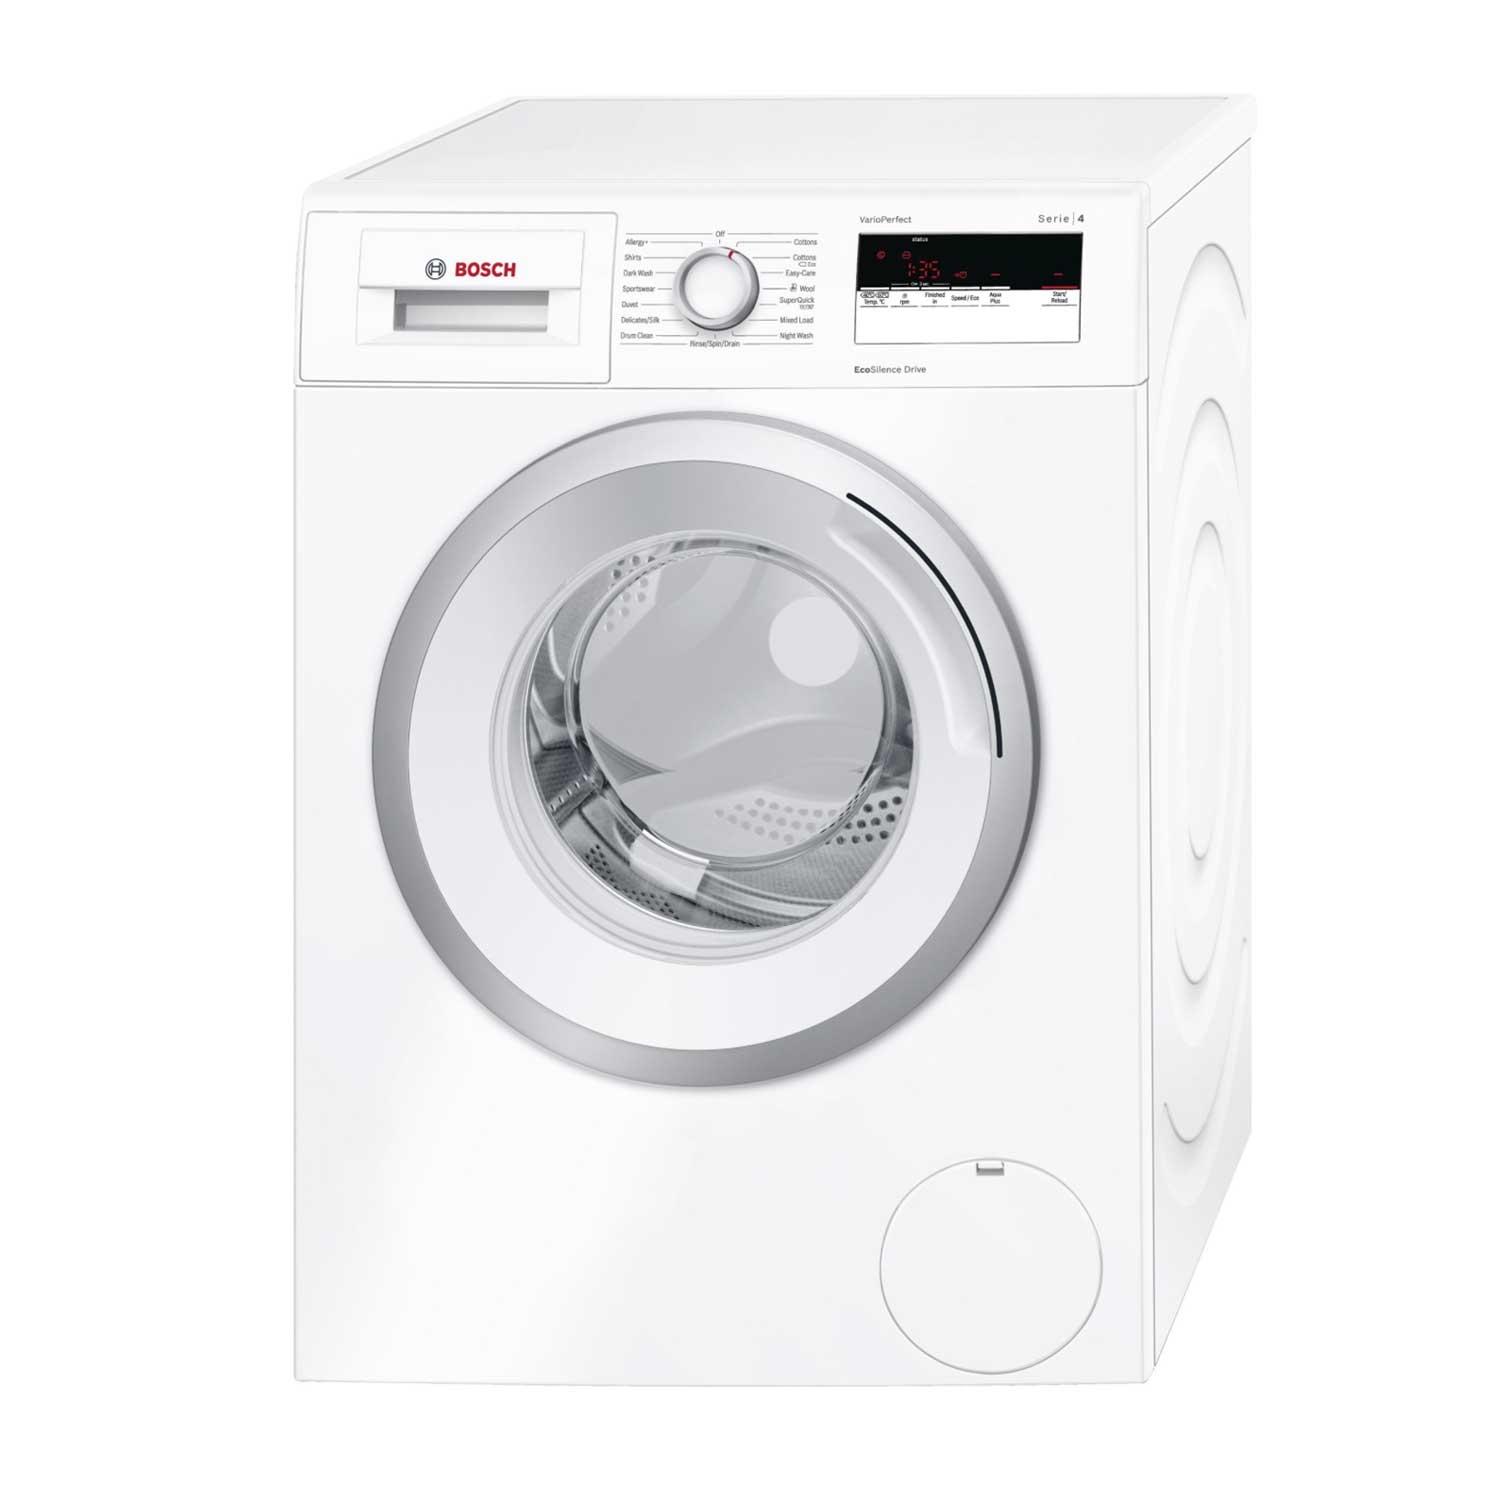 Bosch 7kg 1200 Spin Washing Machine - White - A+++ Rated - 0